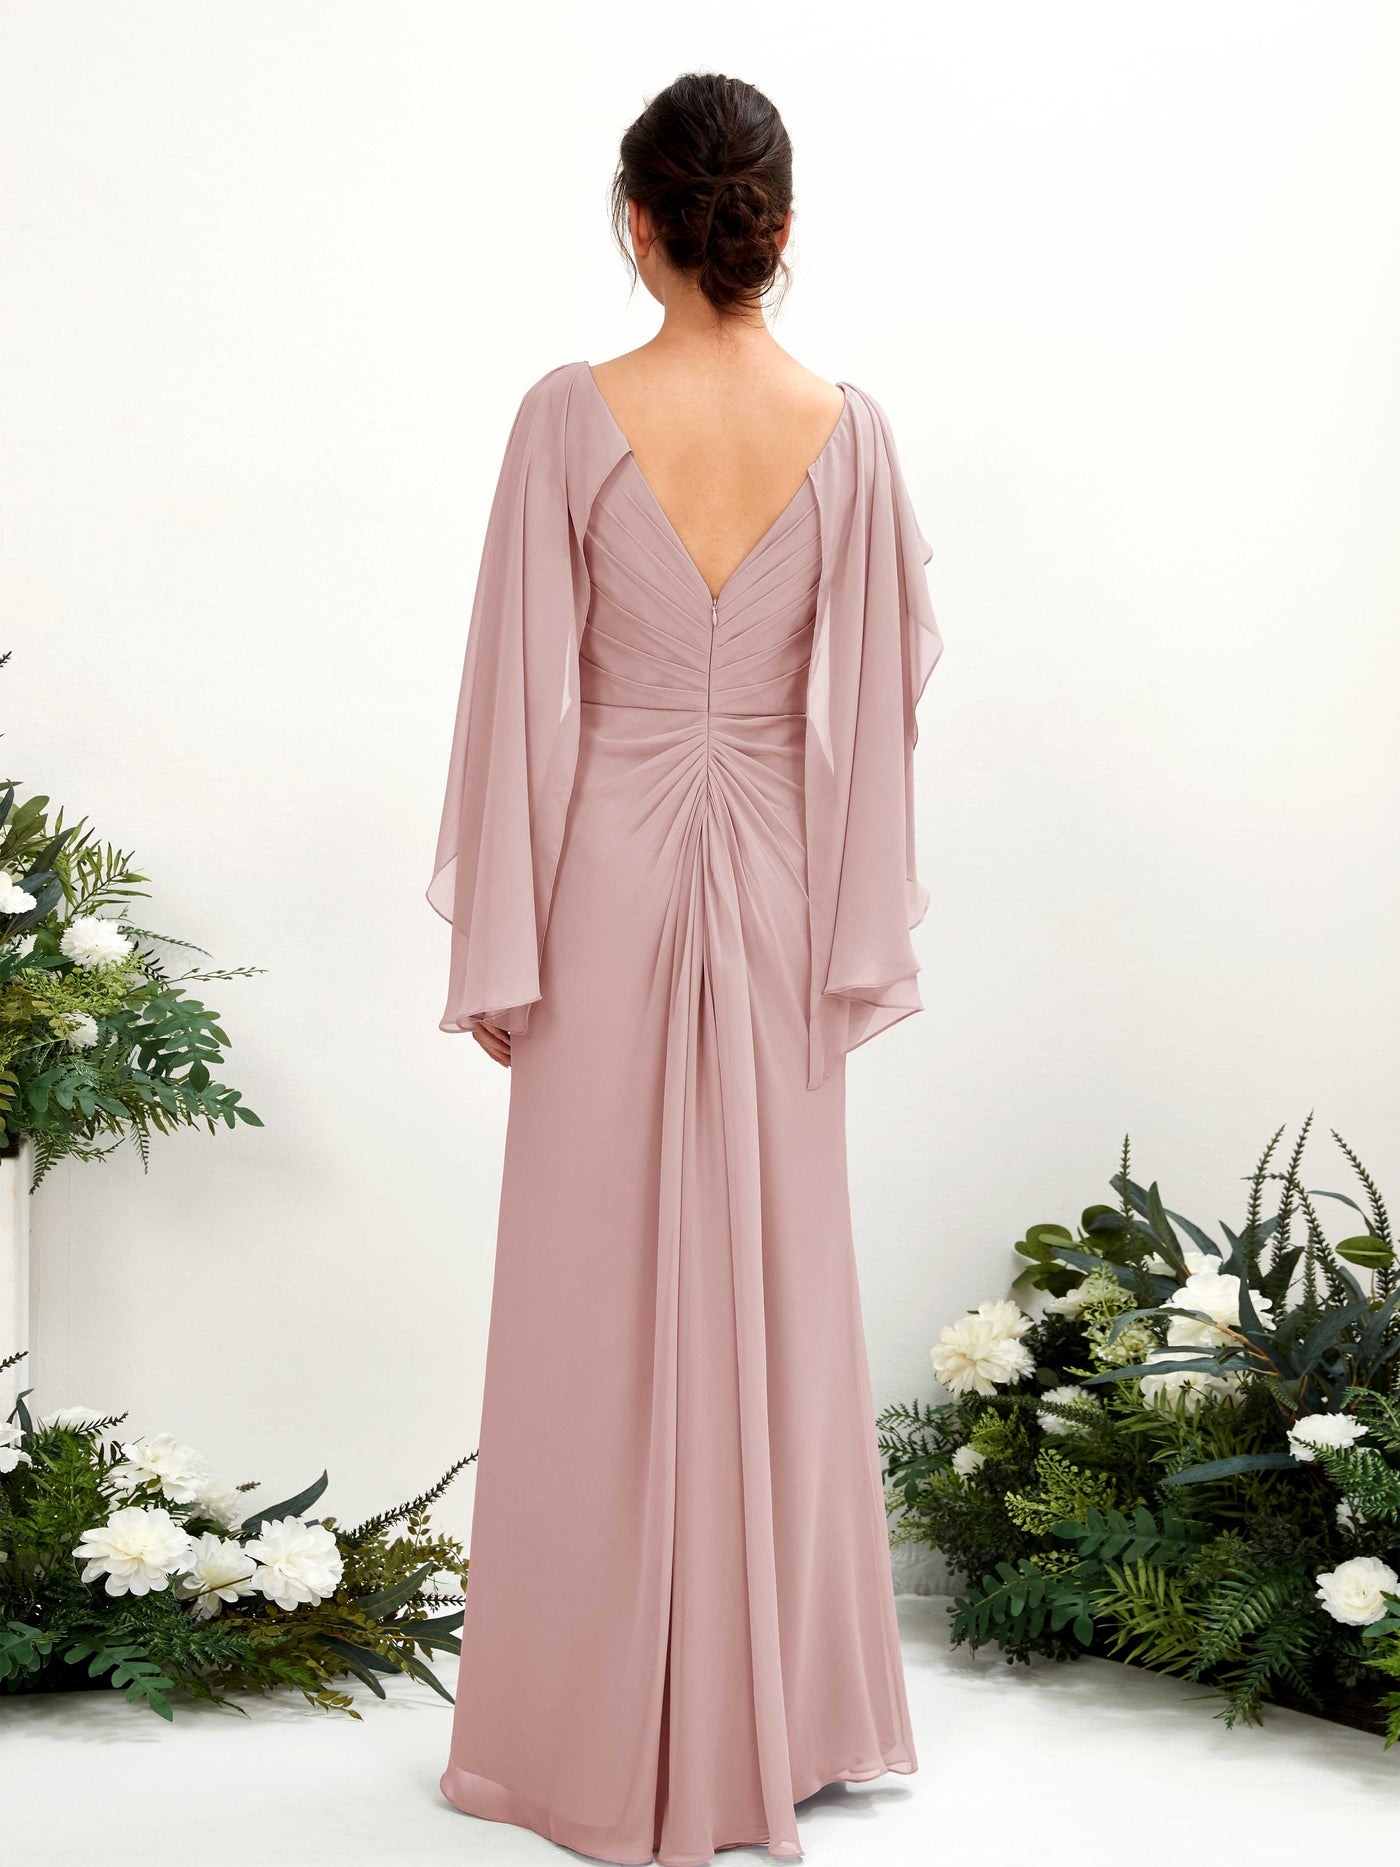 Dusty Rose Bridesmaid Dresses Bridesmaid Dress A-line Chiffon Straps Full Length Long Sleeves Wedding Party Dress (80220109)#color_dusty-rose